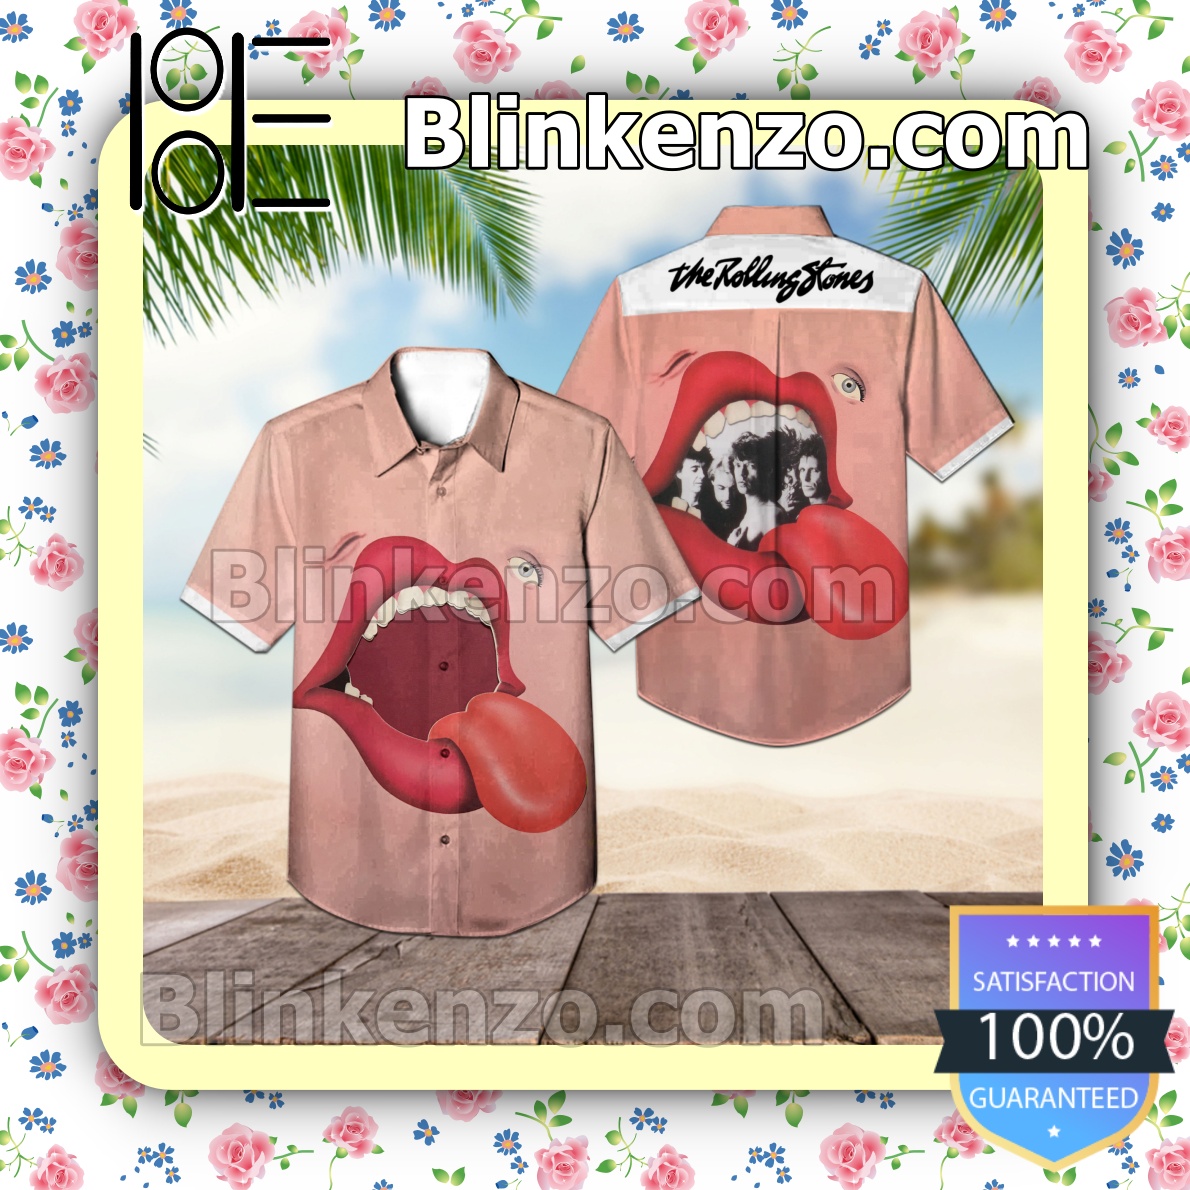 Silver Train Song By The Rolling Stones Summer Beach Shirt